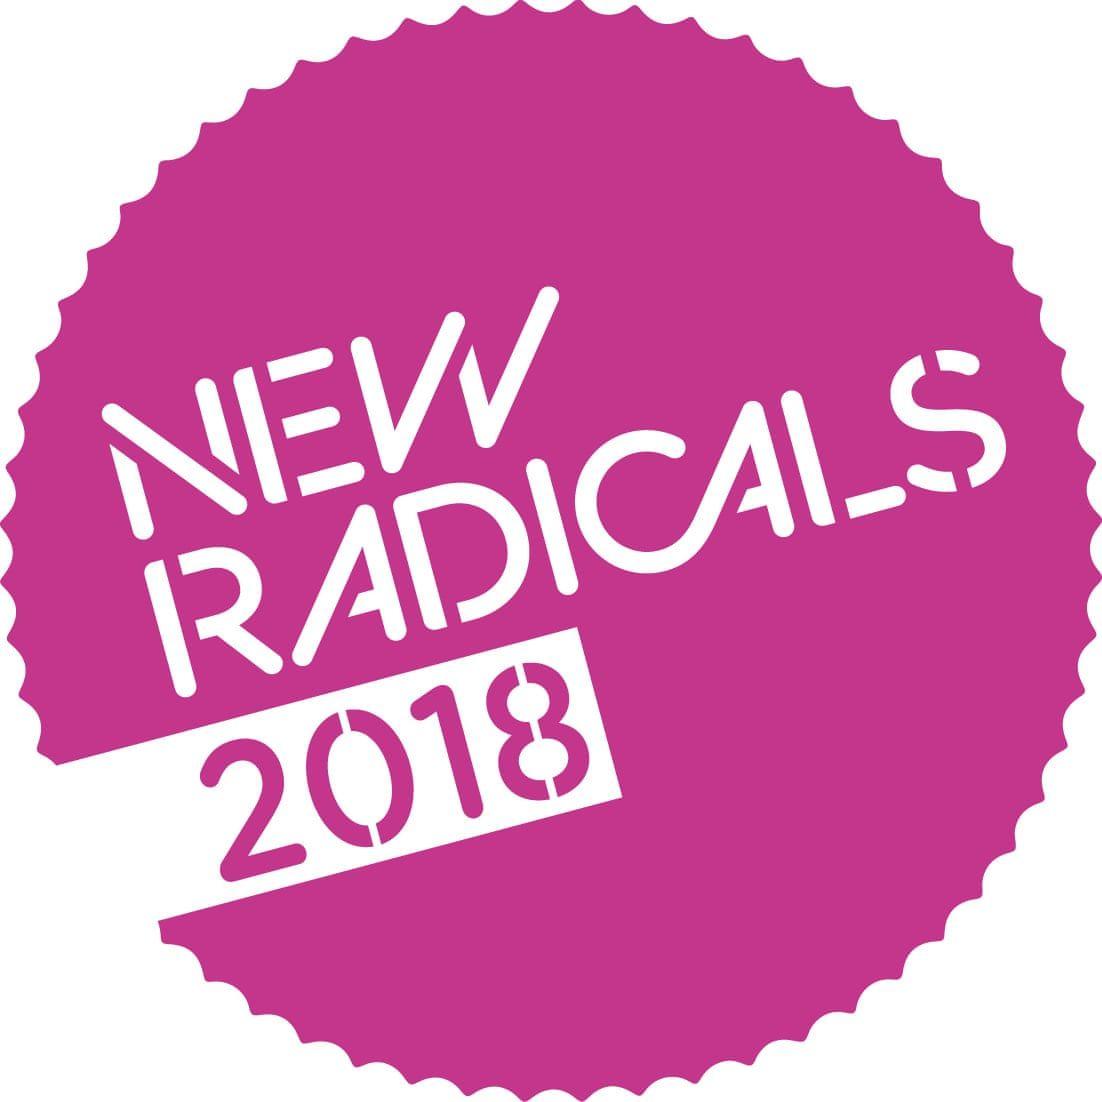 Word 2018 Logo - New Radicals logo featuring 2018 of Colour of Colour